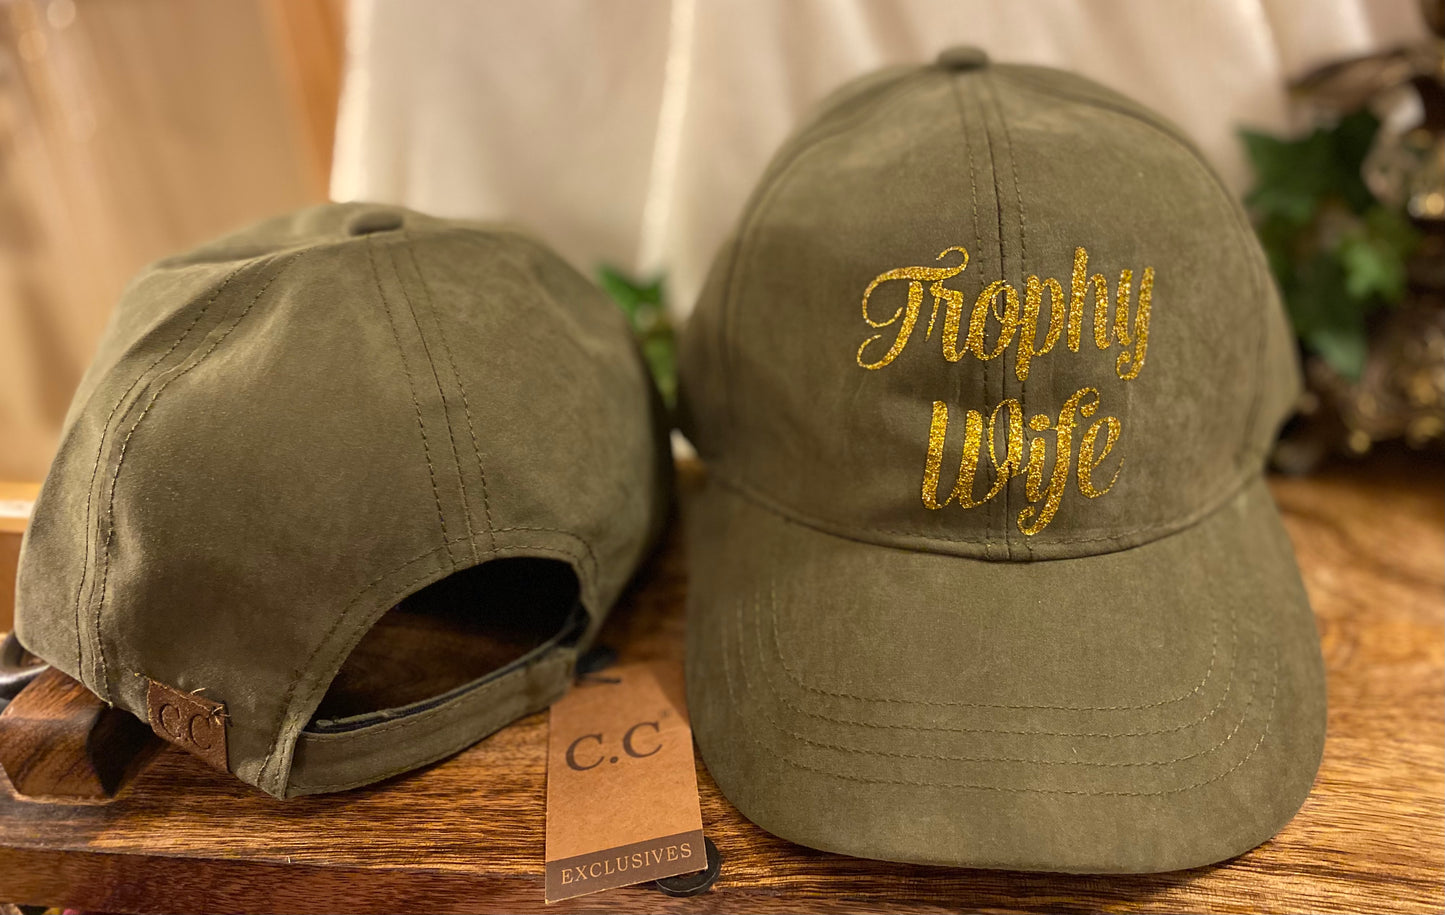 Trophy Wife Ponytail Hat Olive With Gold Writing